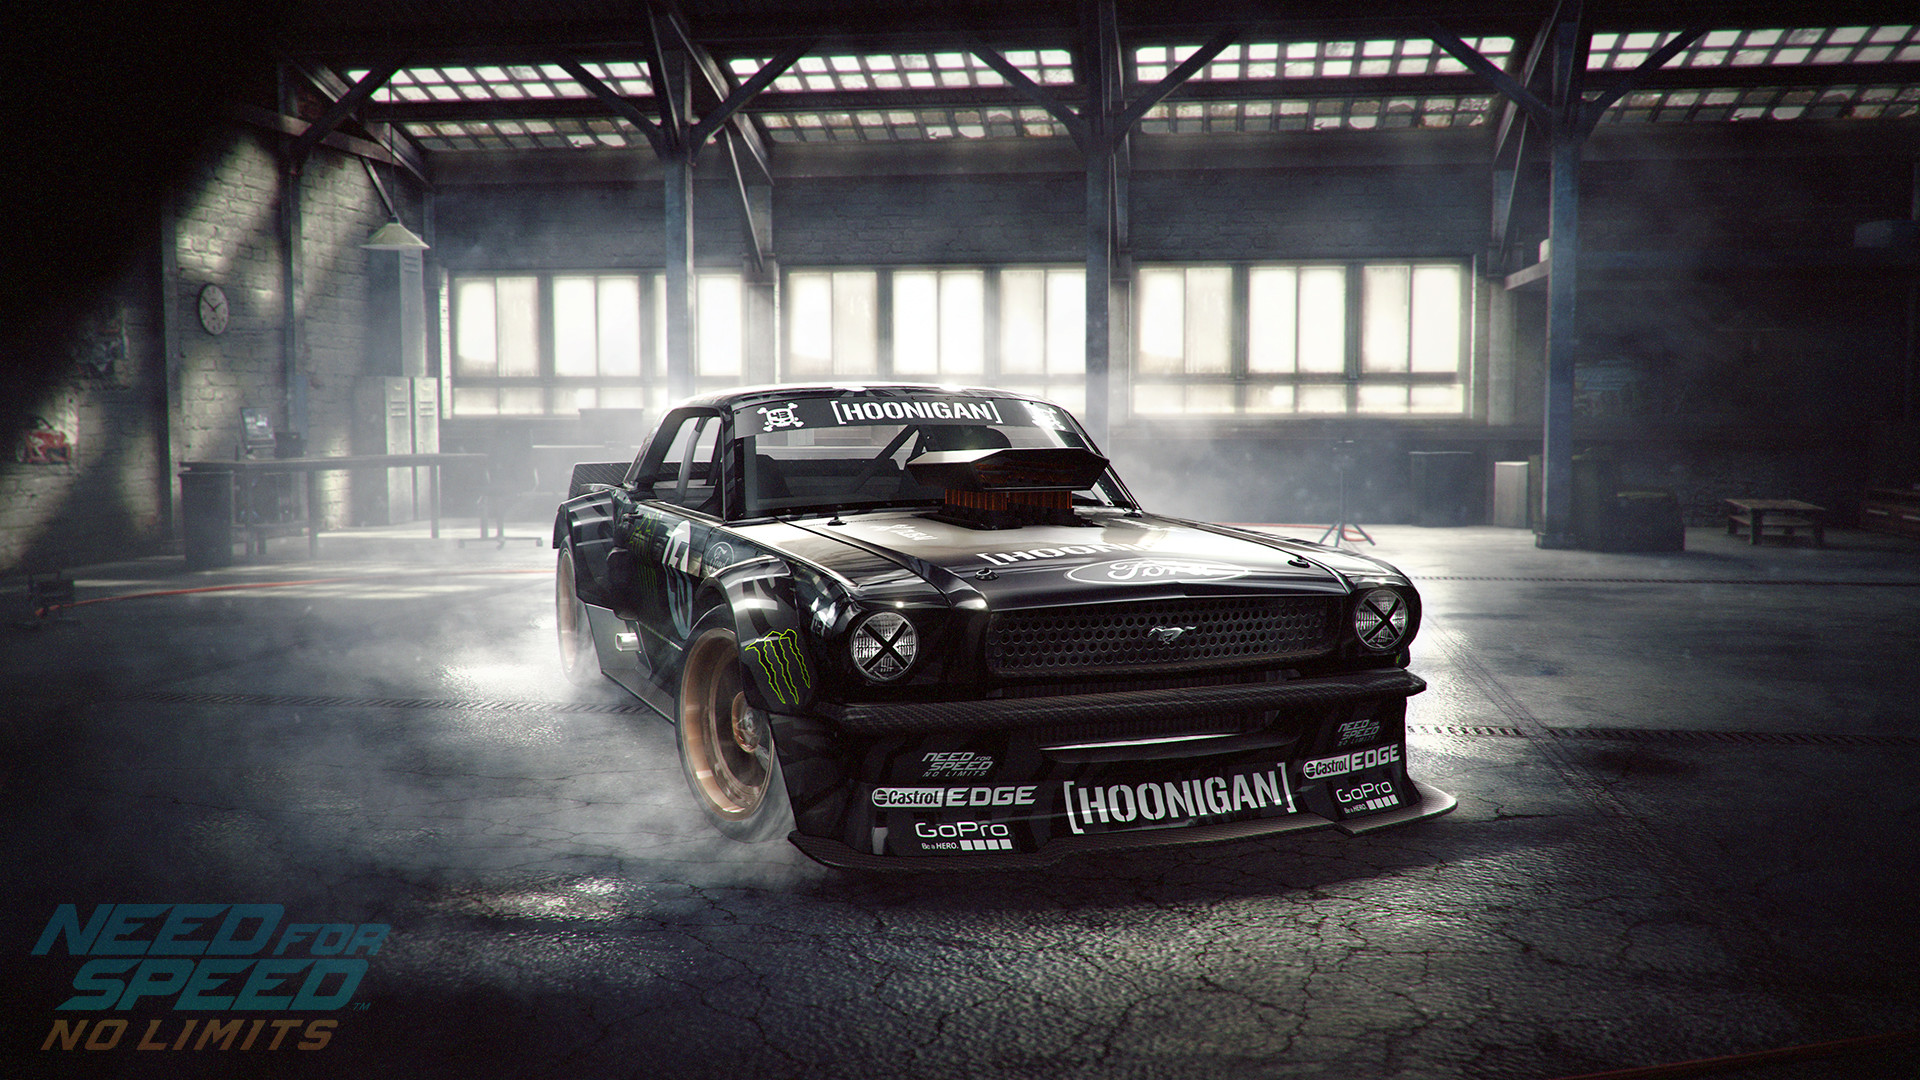 1920x1080 Video Game - Need For Speed: No Limits Bakgrund